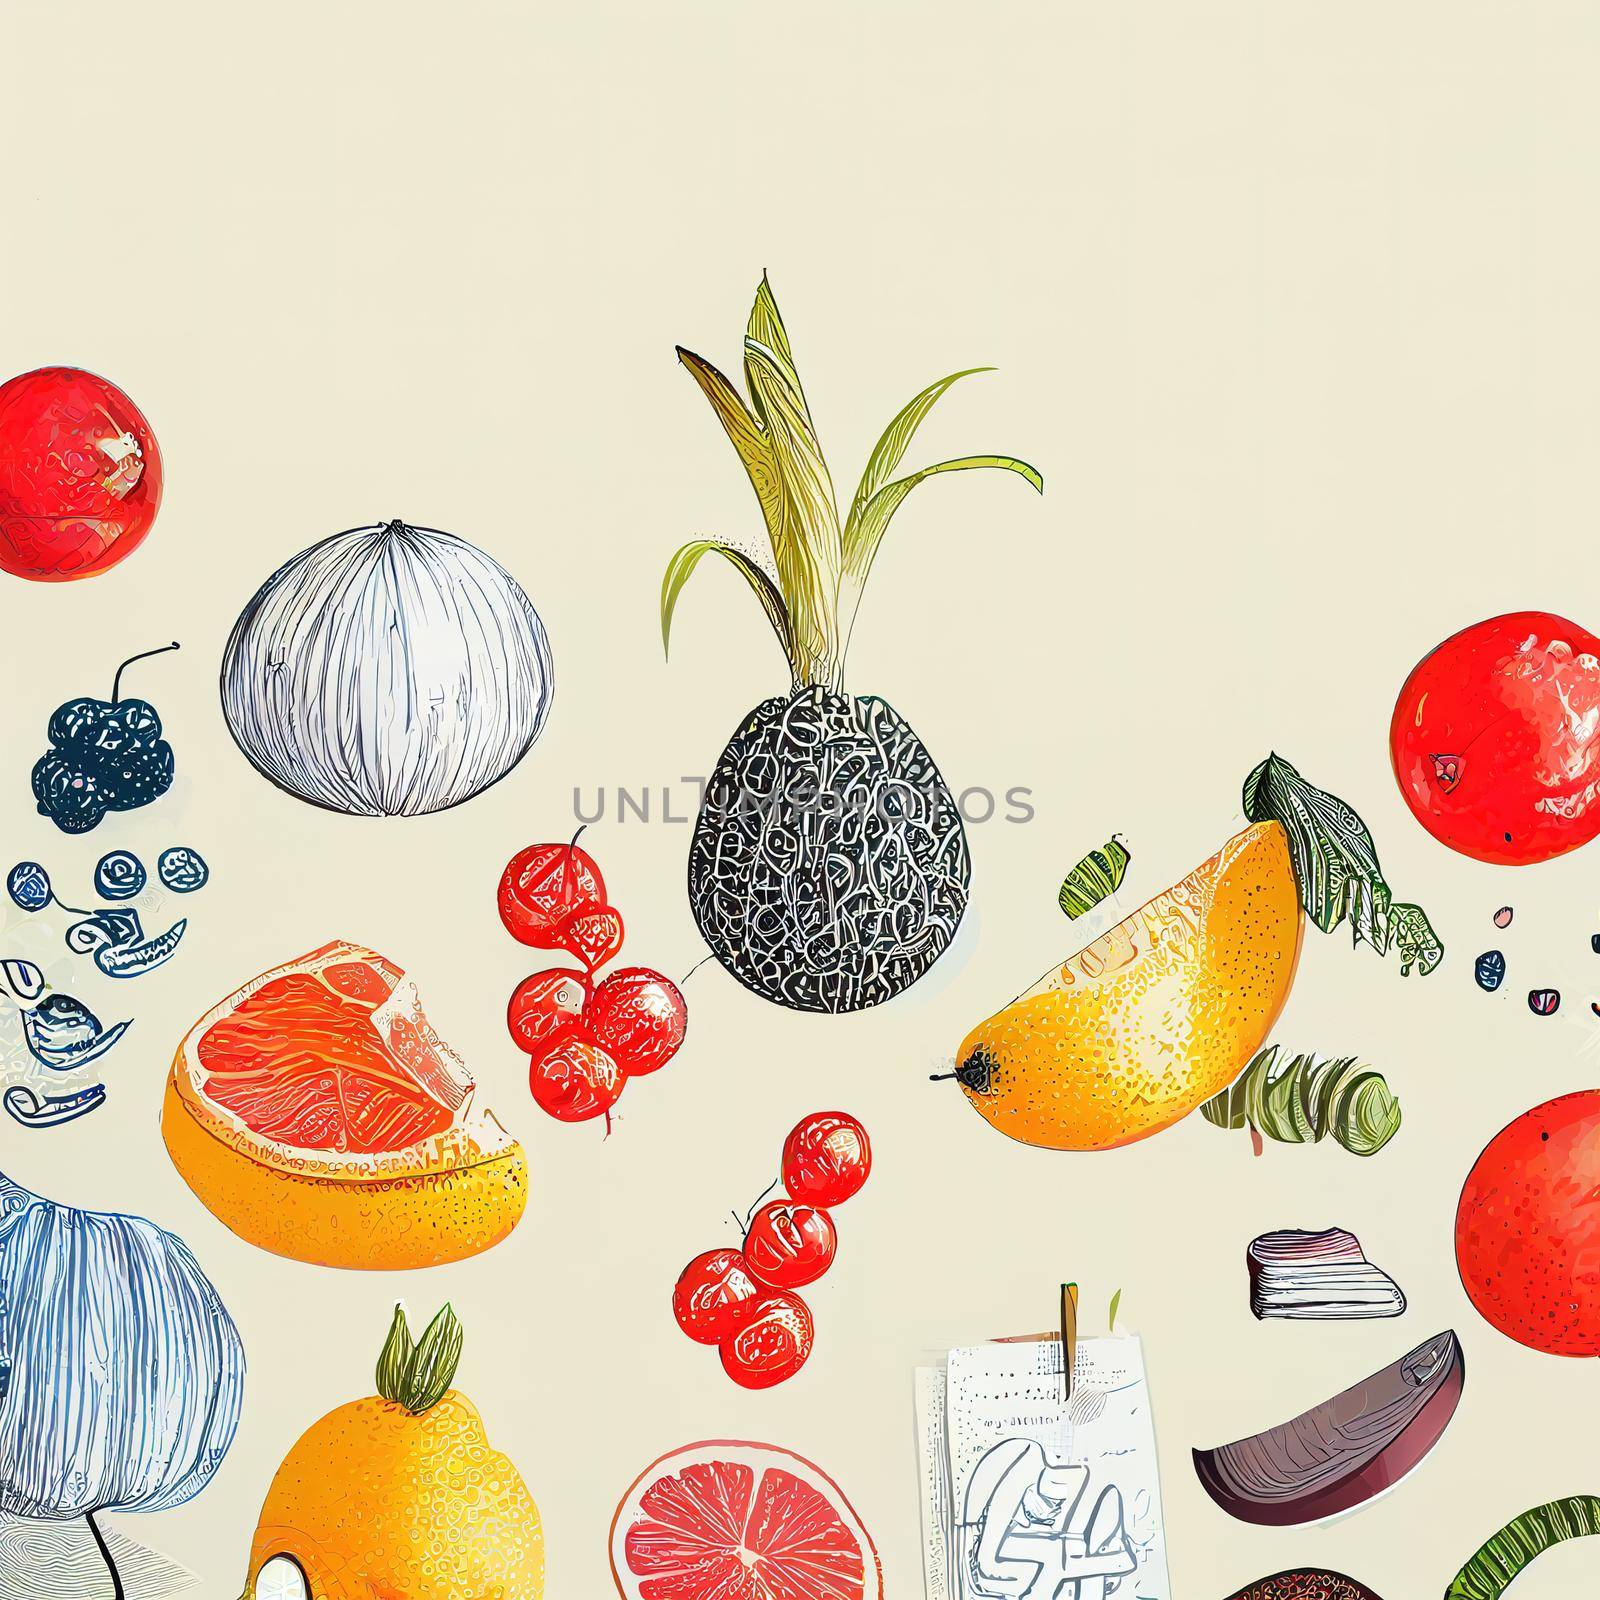 Fresh stylish illustration with abstract elements, doodles and fruits. High quality 3d illustration